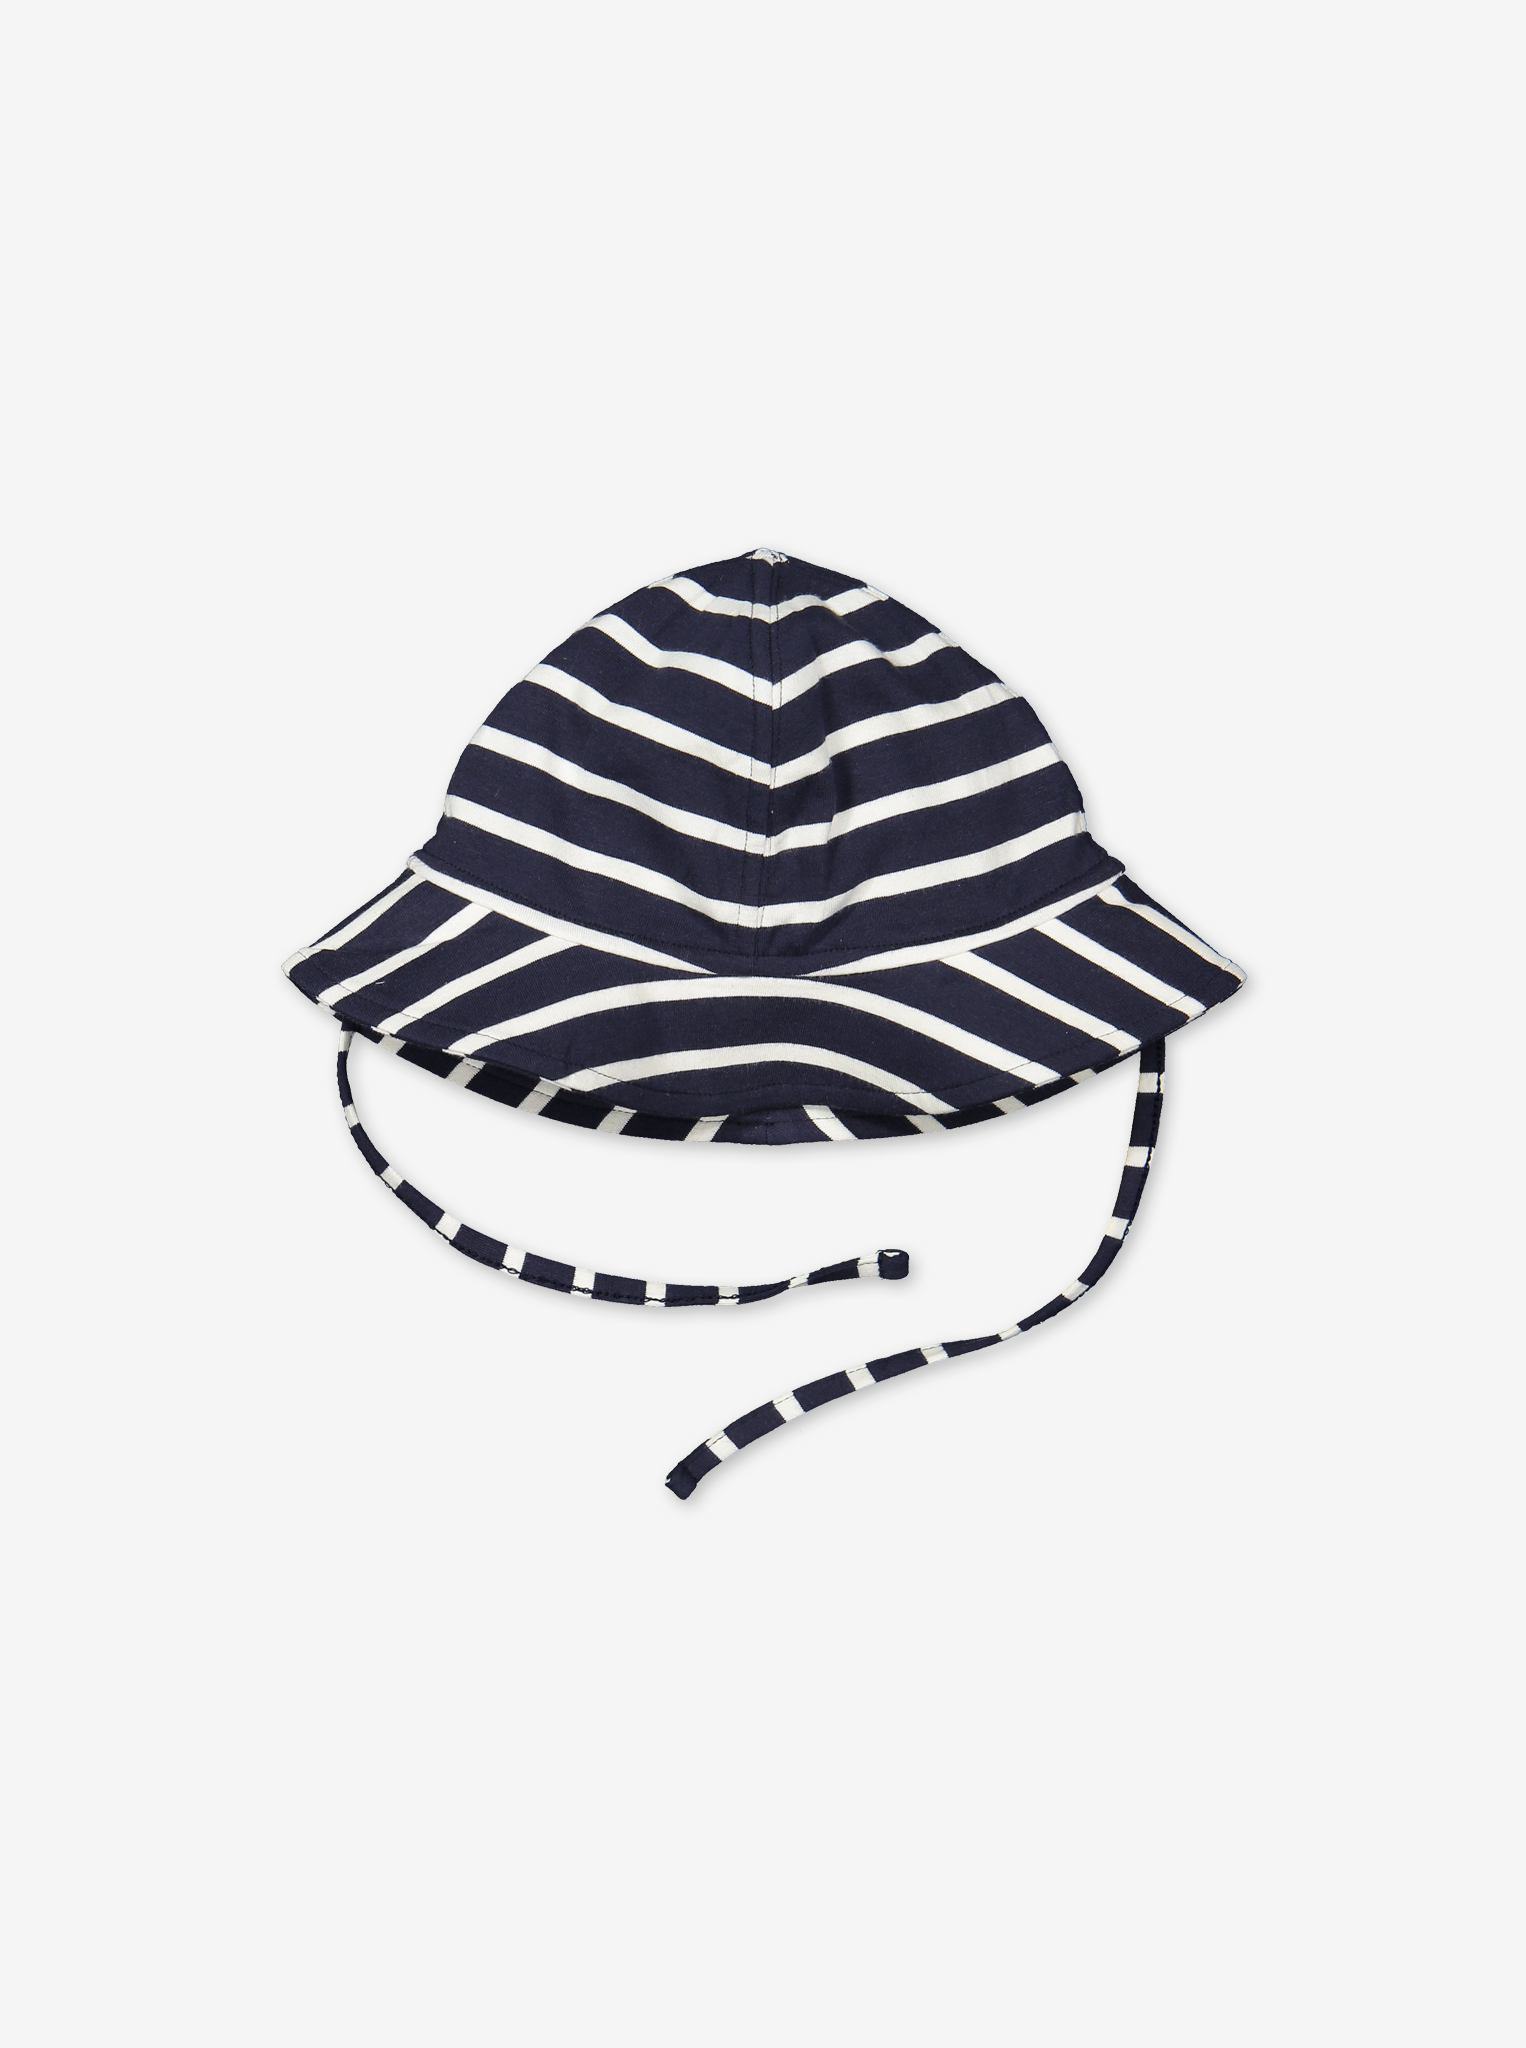 Striped sun hat with tie strings for baby-Unisex-1m-2y-Blue